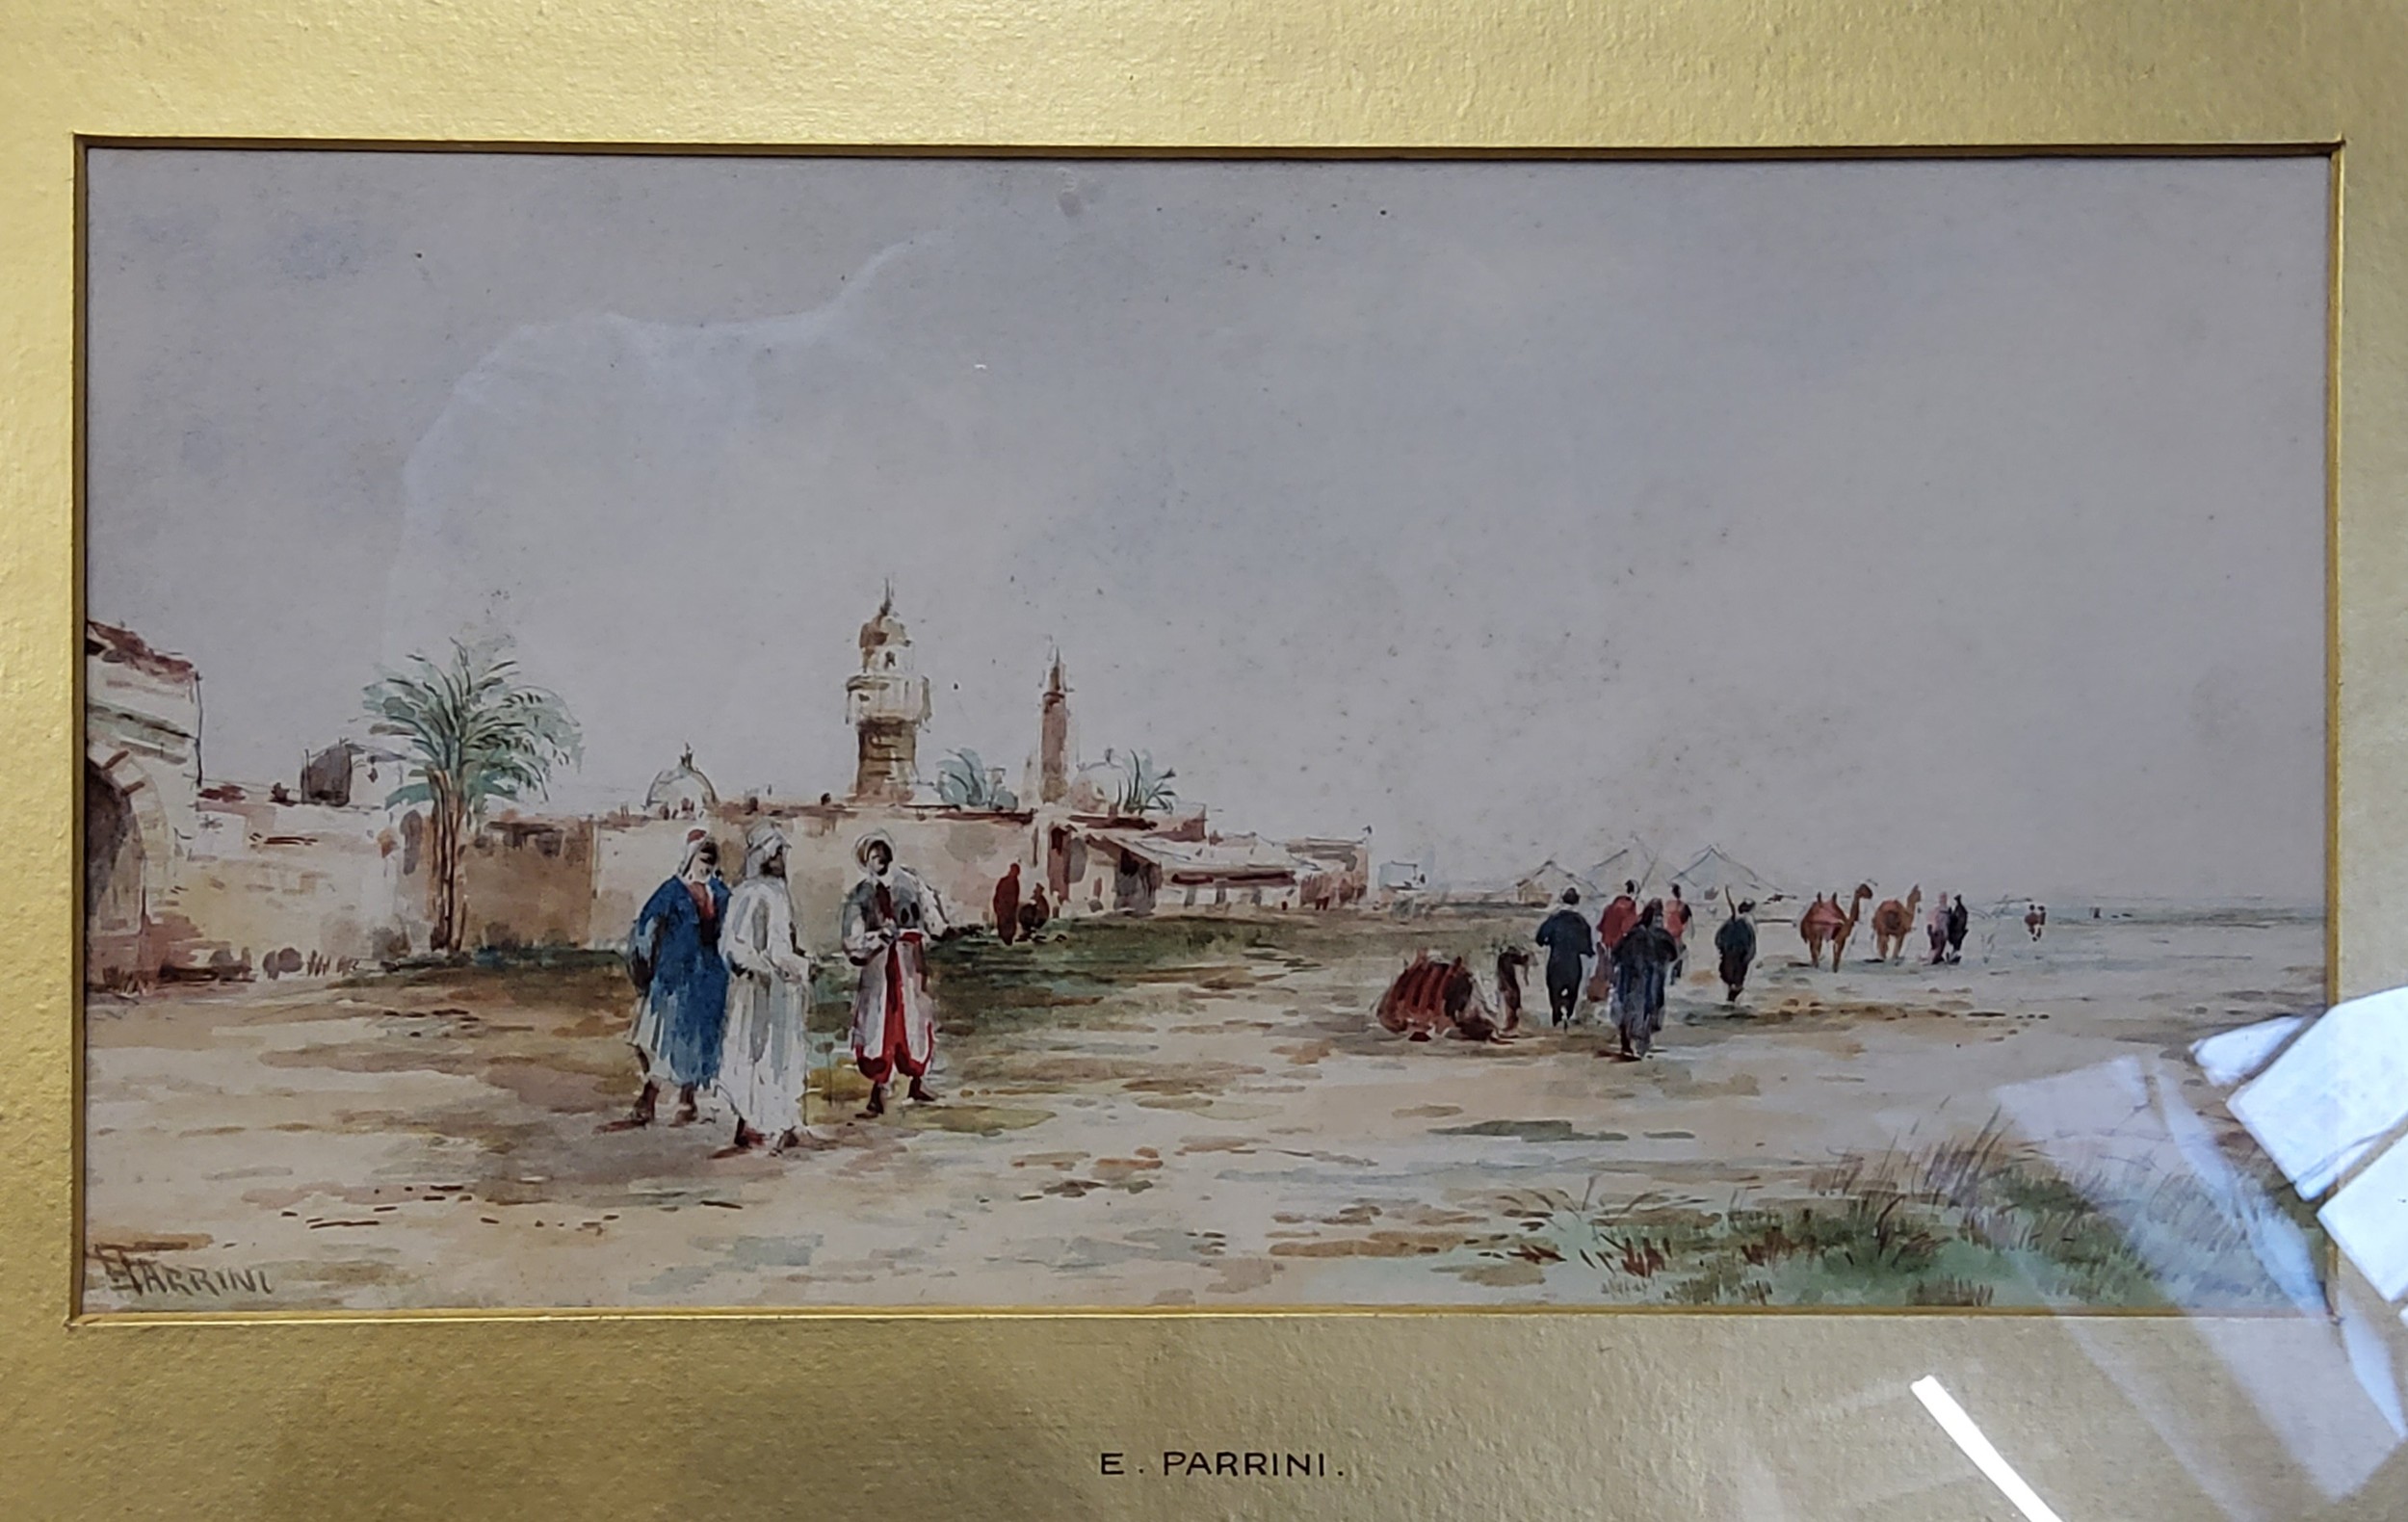 Edward Parrini (early 20th century) A Pair, Cairo City Wall and Middle Eastern Street signed, - Image 2 of 3